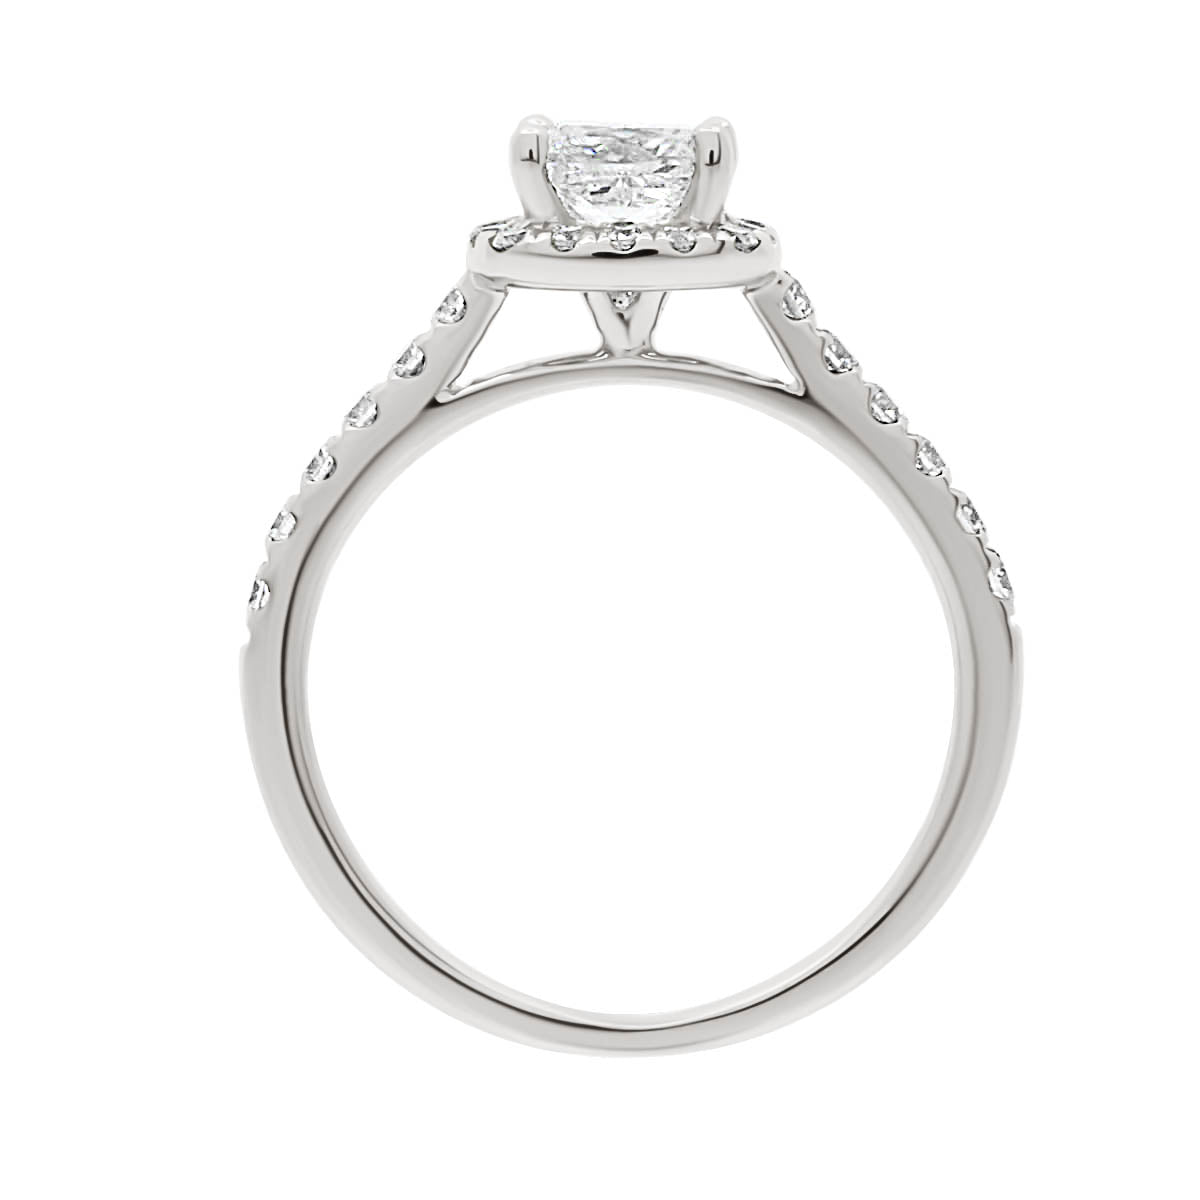 Princess Cut Diamond Halo Ring in white gold standing upright on a white backgrouns